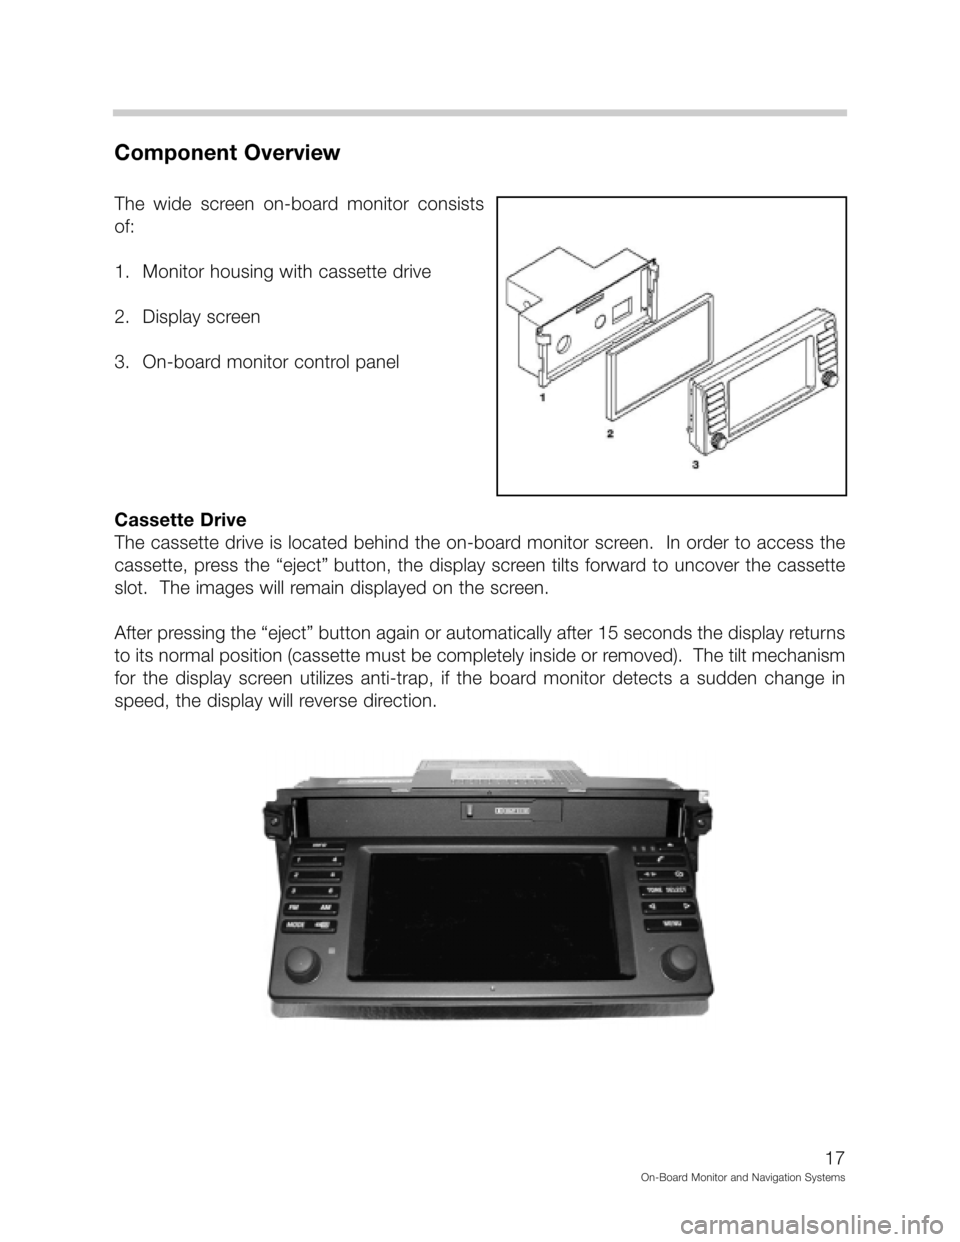 BMW 7 SERIES 2000 E38 On Board Monitor System User Guide *,



"&
(	
2./!!,, 7
# % 
 
 	
 


* 

%&
 

. 
	


